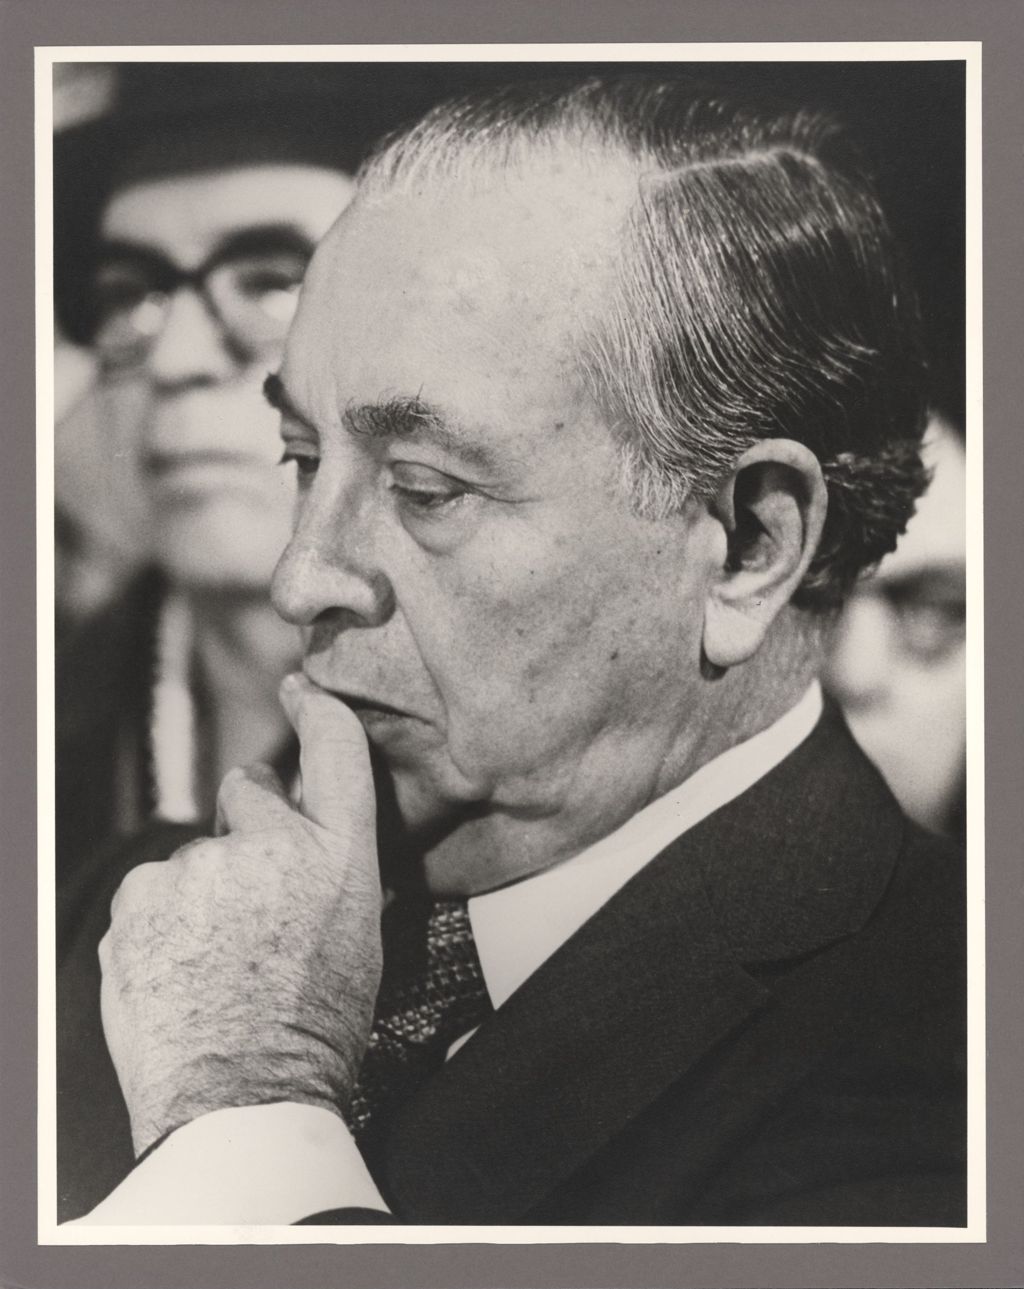 Miniature of Richard J. Daley in a thoughtful pose